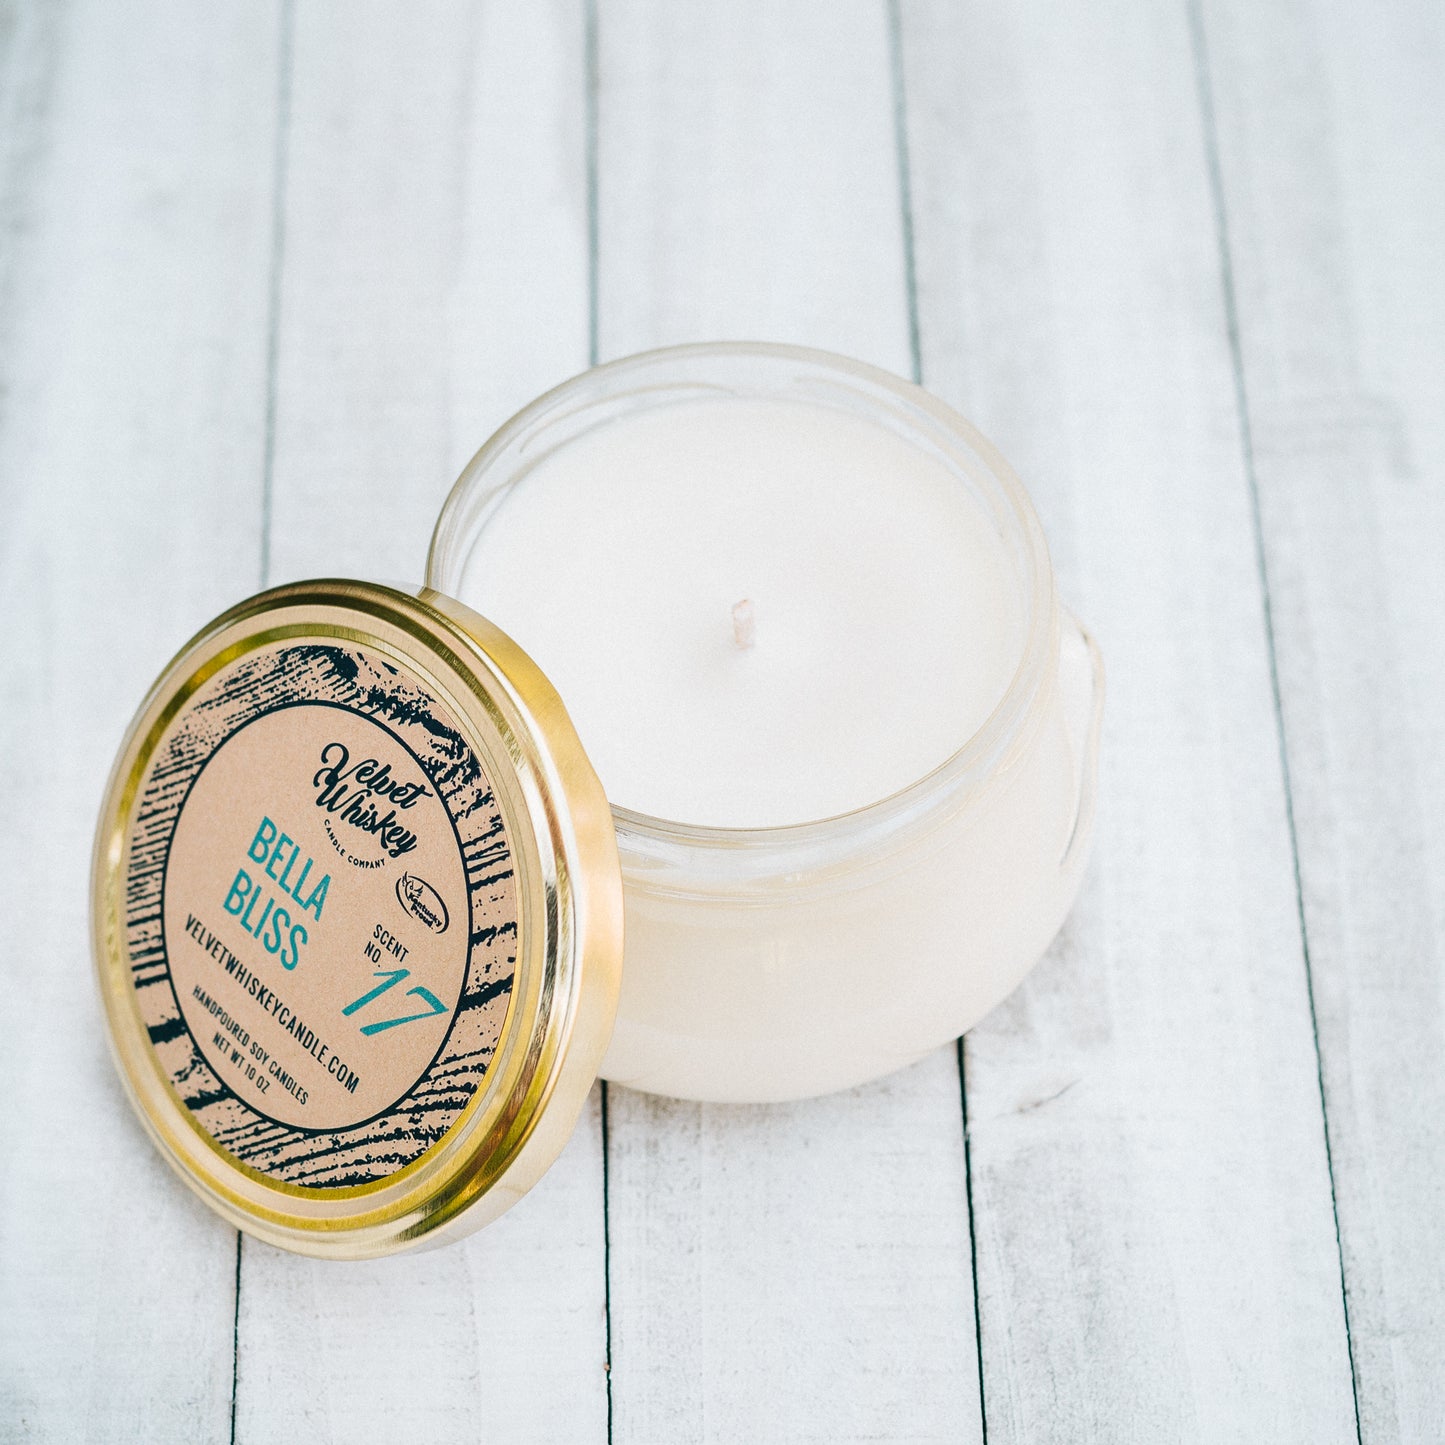 Bella Bliss 11 oz Candle